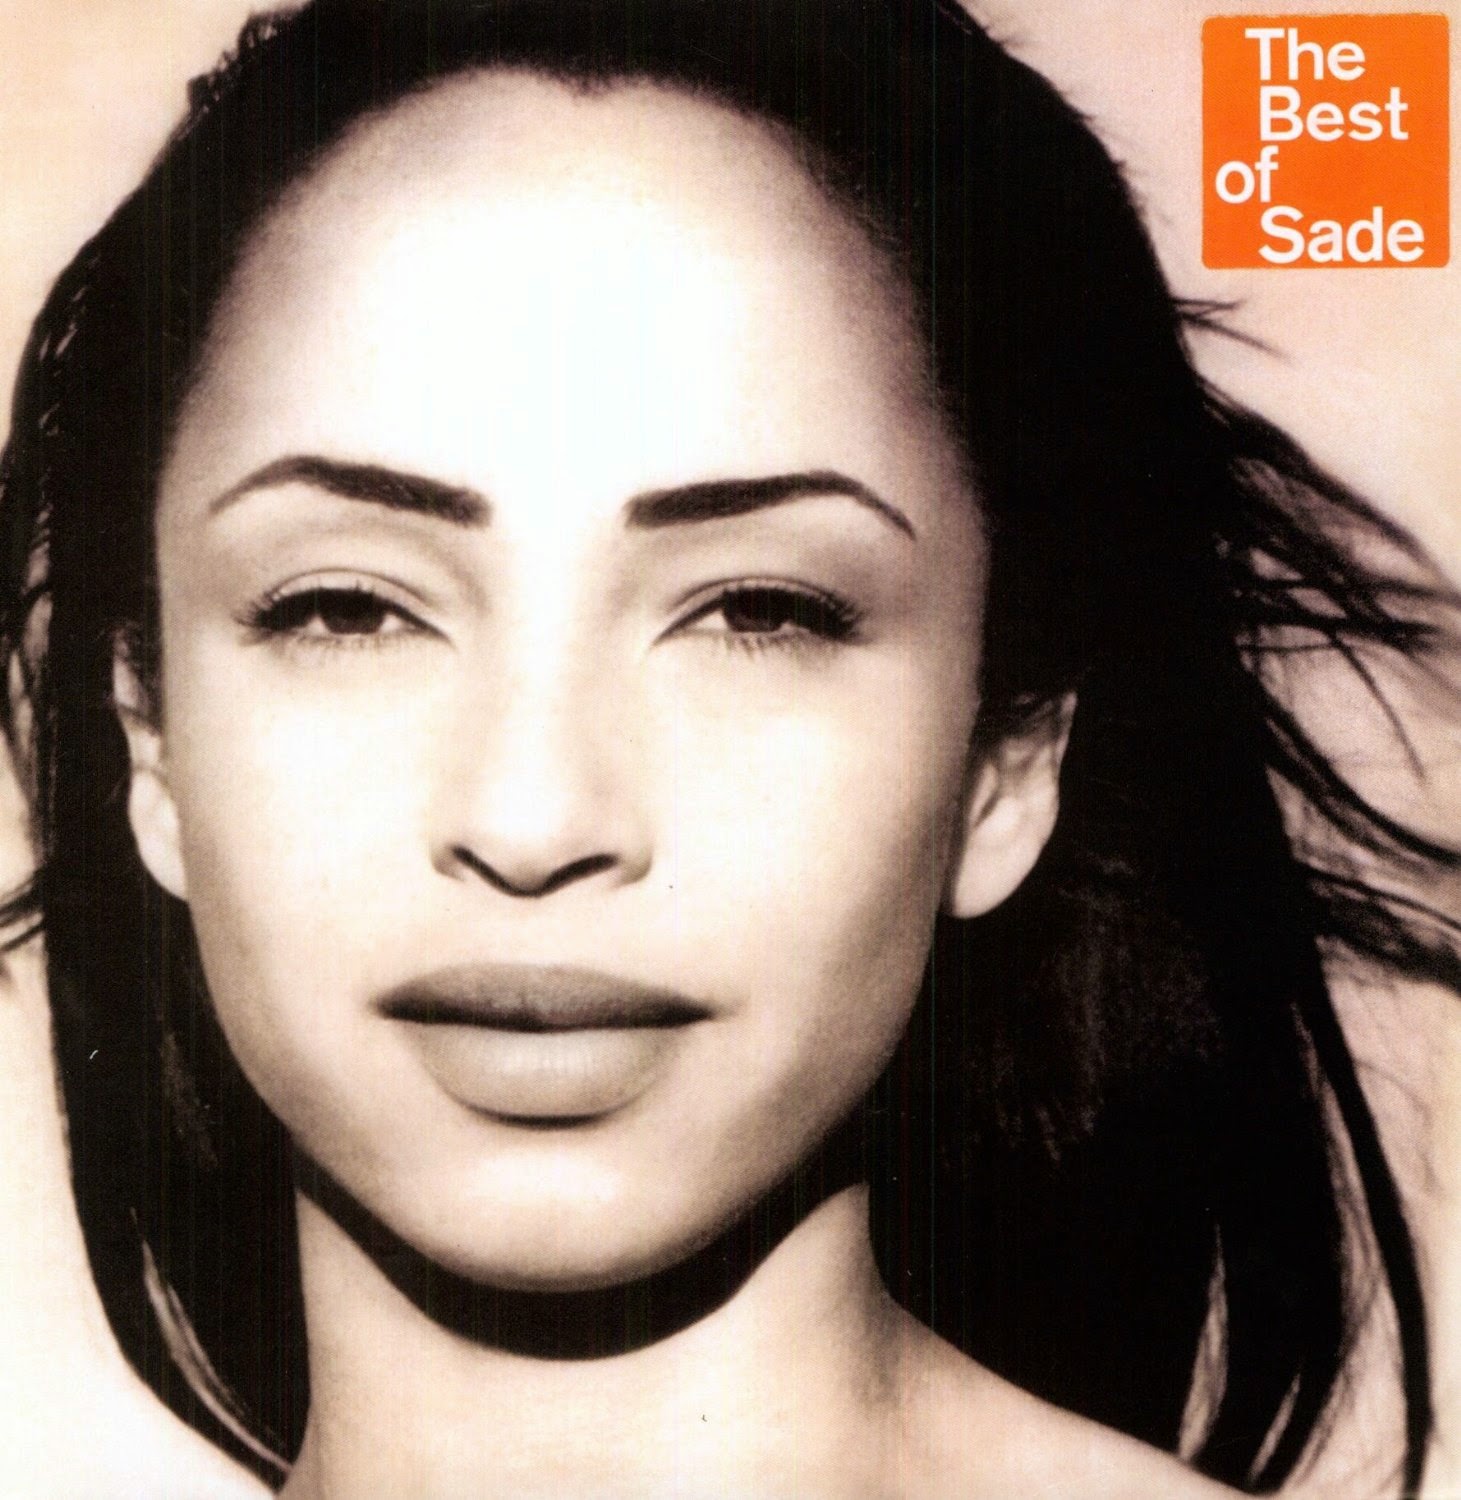 sade albums and songs